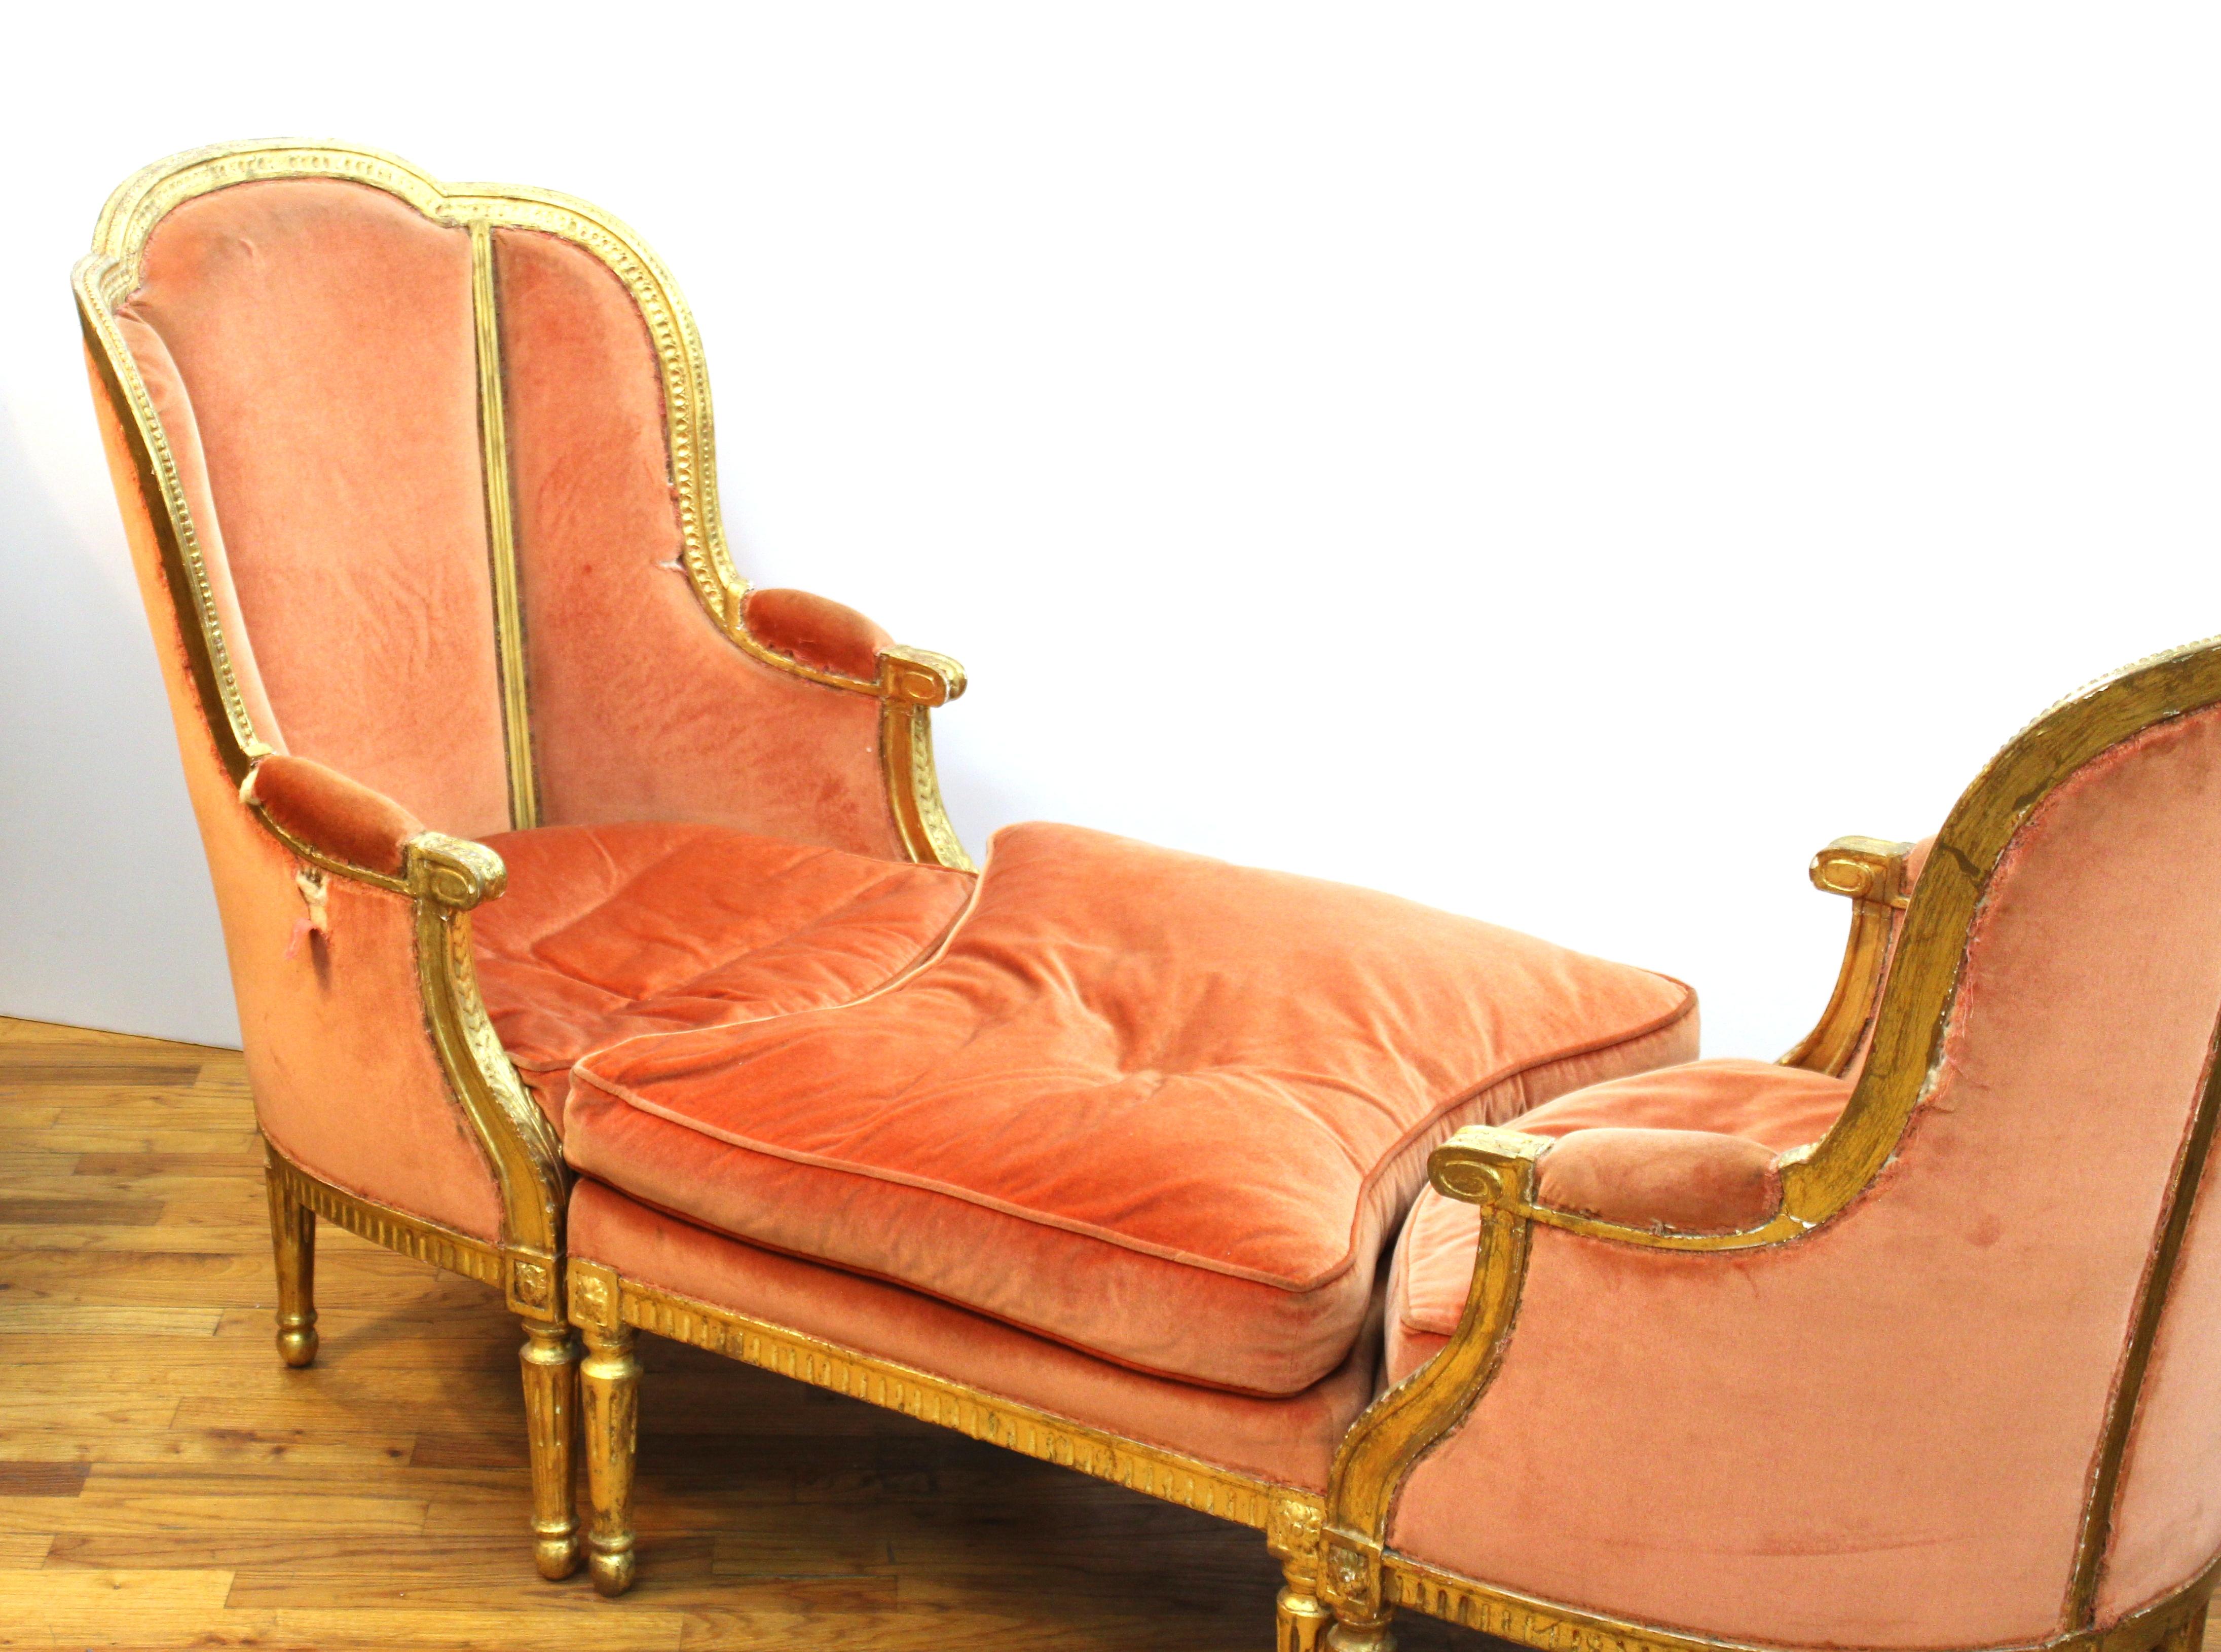 French Louis XVI style set of two giltwood fauteuils and one ottoman, forming a chaise lounge when assembled. In great antique condition with age-appropriate wear and some tears to the fabric.